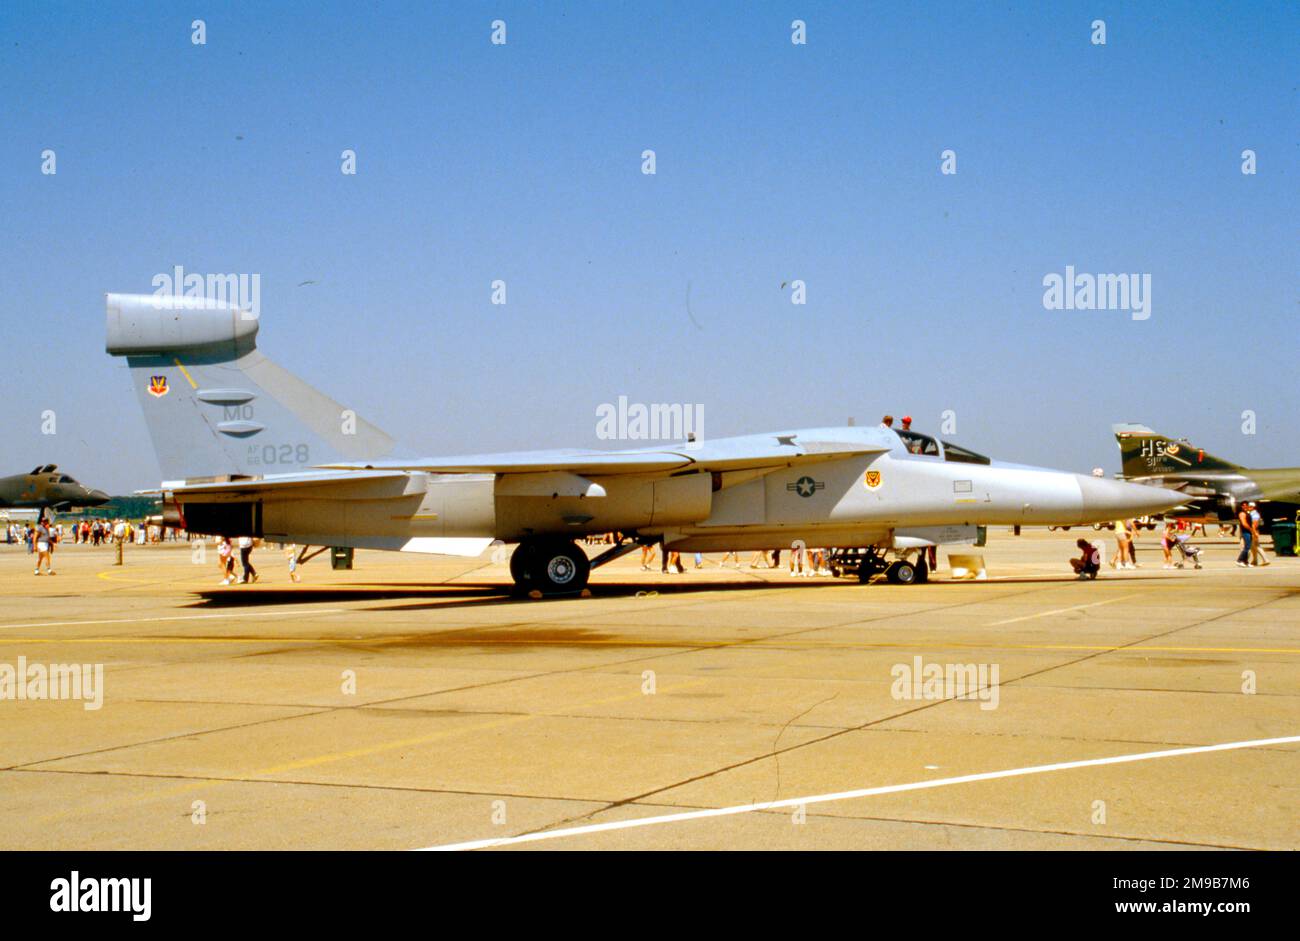 United States Air Force (USAF) - General Dynamics EF-111A Raven 66-0028 (msn EF-28), of the 42nd ECS, 66th ECW. Stock Photo